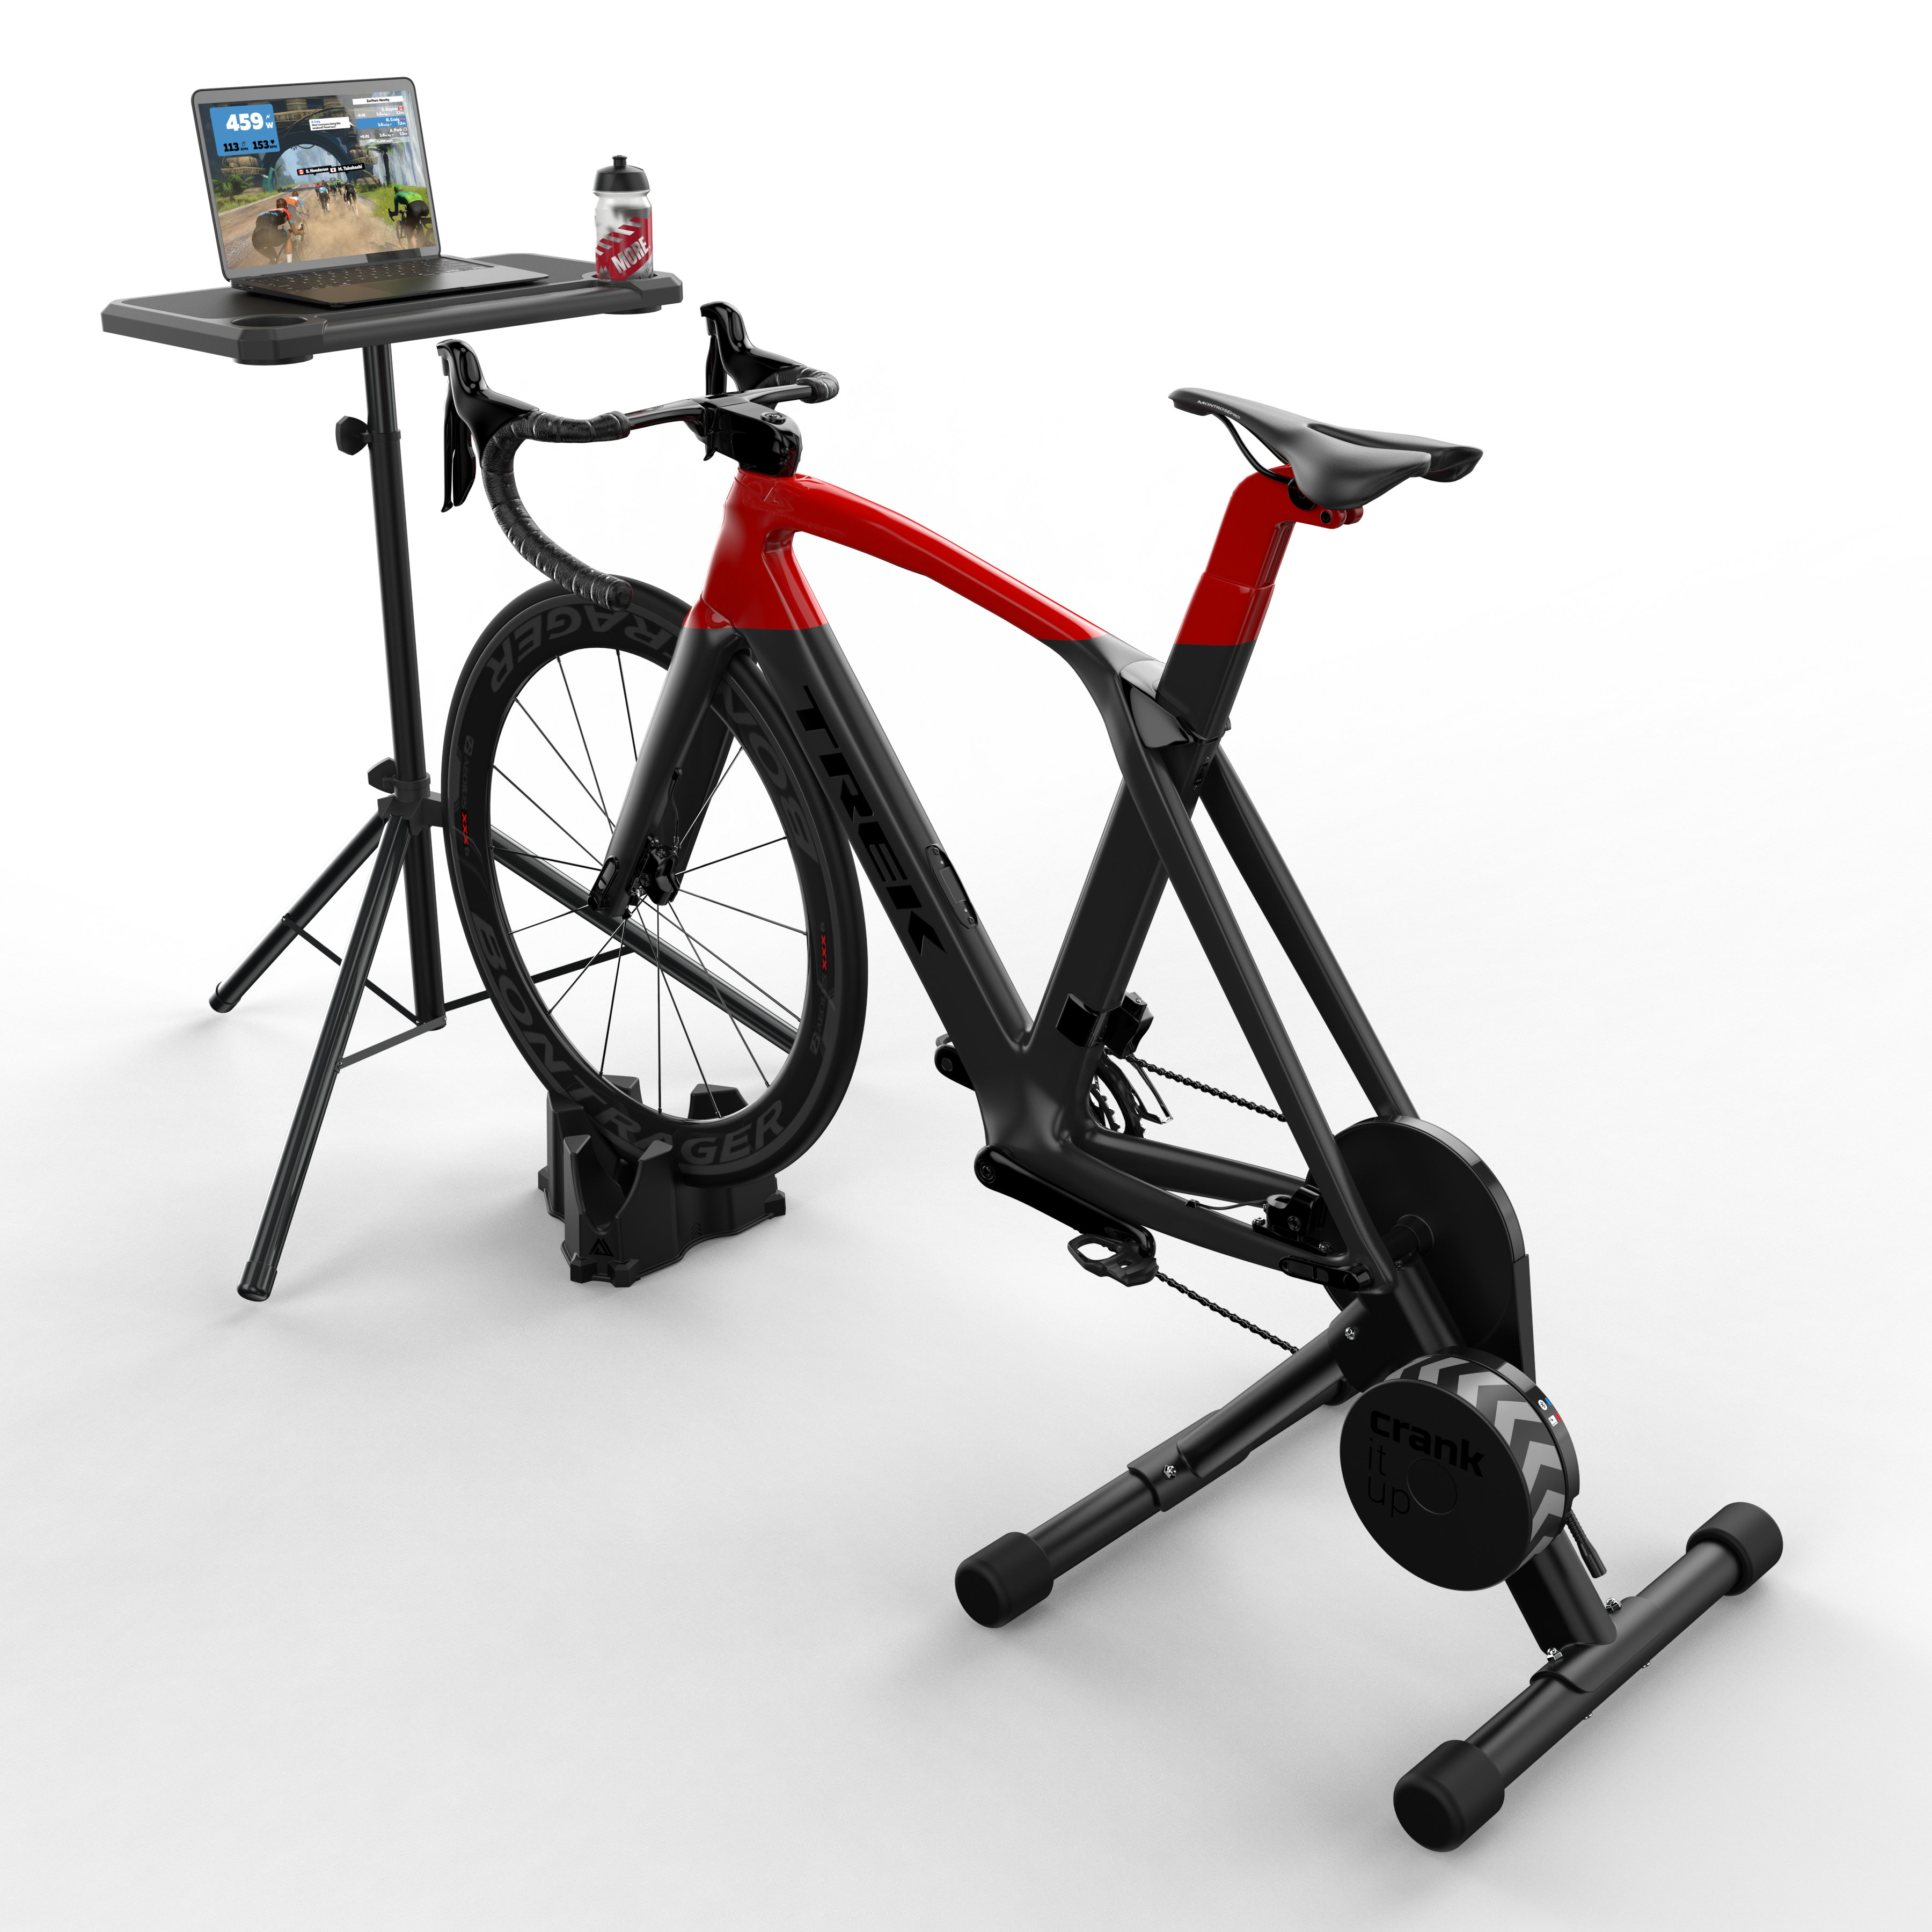 KOM Cycling’s new Indoor Media Display is an adjustable desk that fits a laptop, tablet, or multiple small devices and has a non-slip padded surface to keep your gadgets in place. Use it as a standing desk or for when you’re on your indoor bike trainer or rowing machine, for instance.